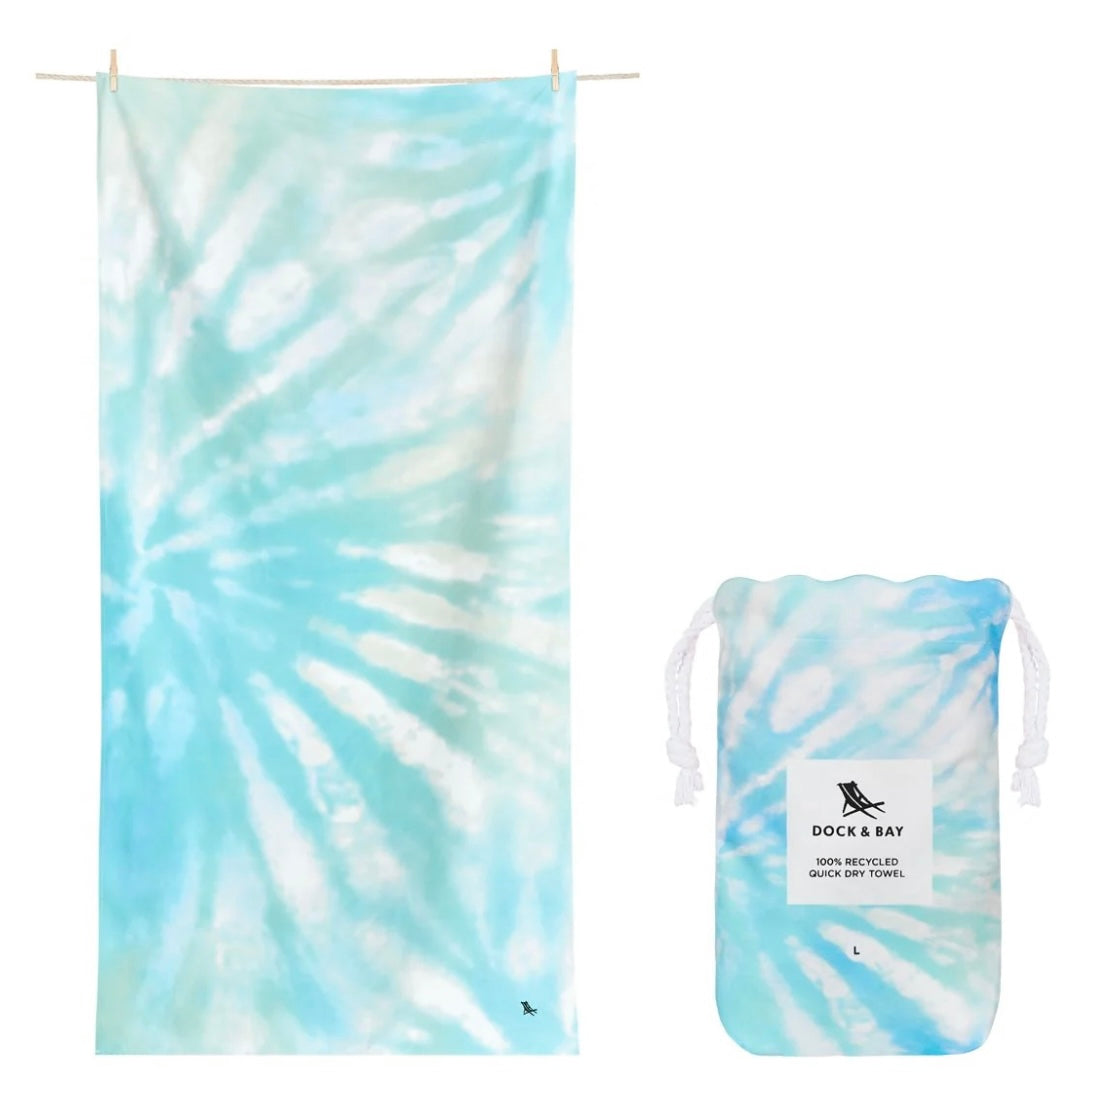 Dock and Bay Quick Dry Towel